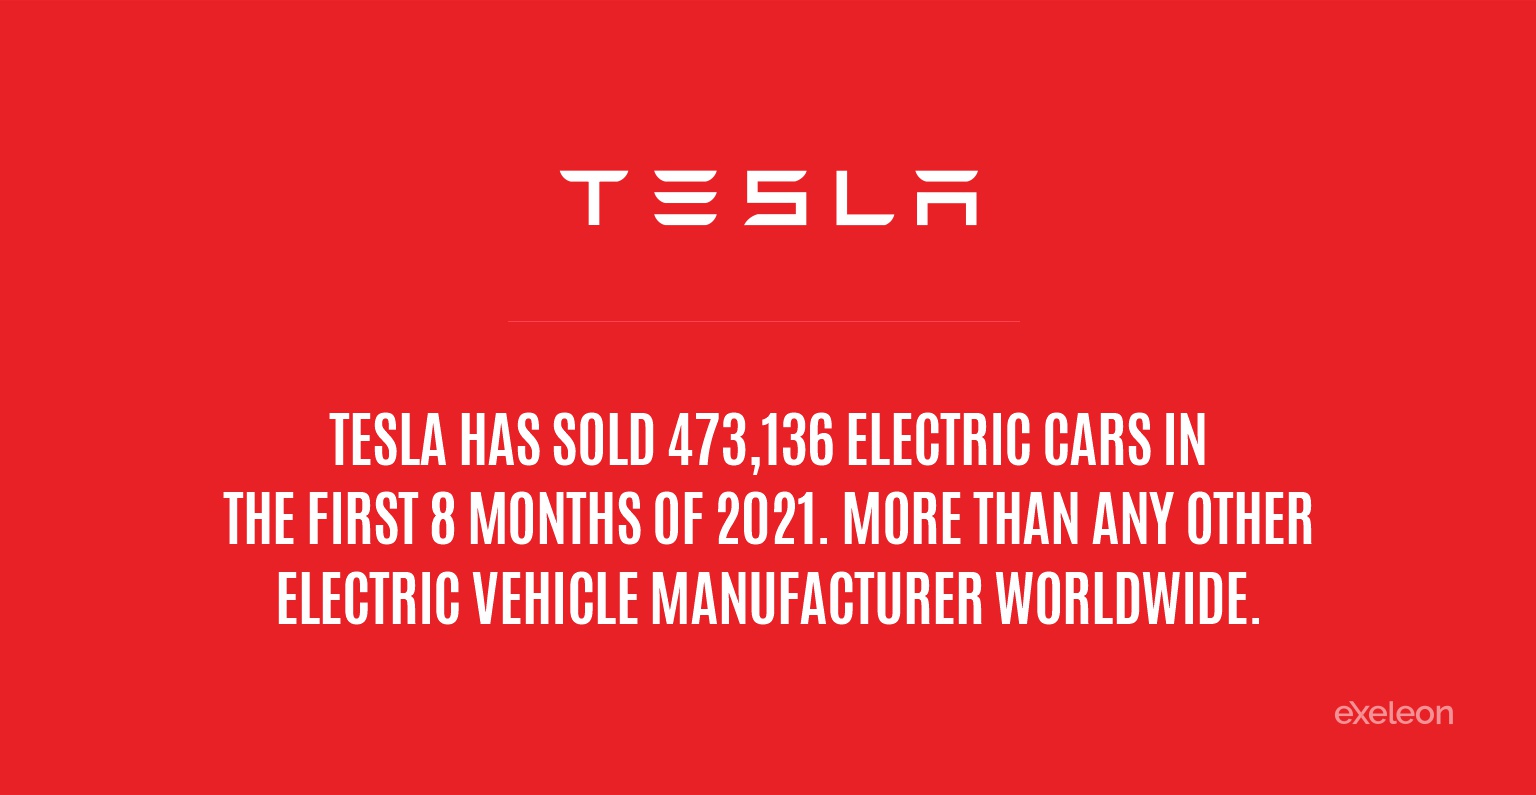 Tesla 50 Most Powerful Brands in the World in 2022